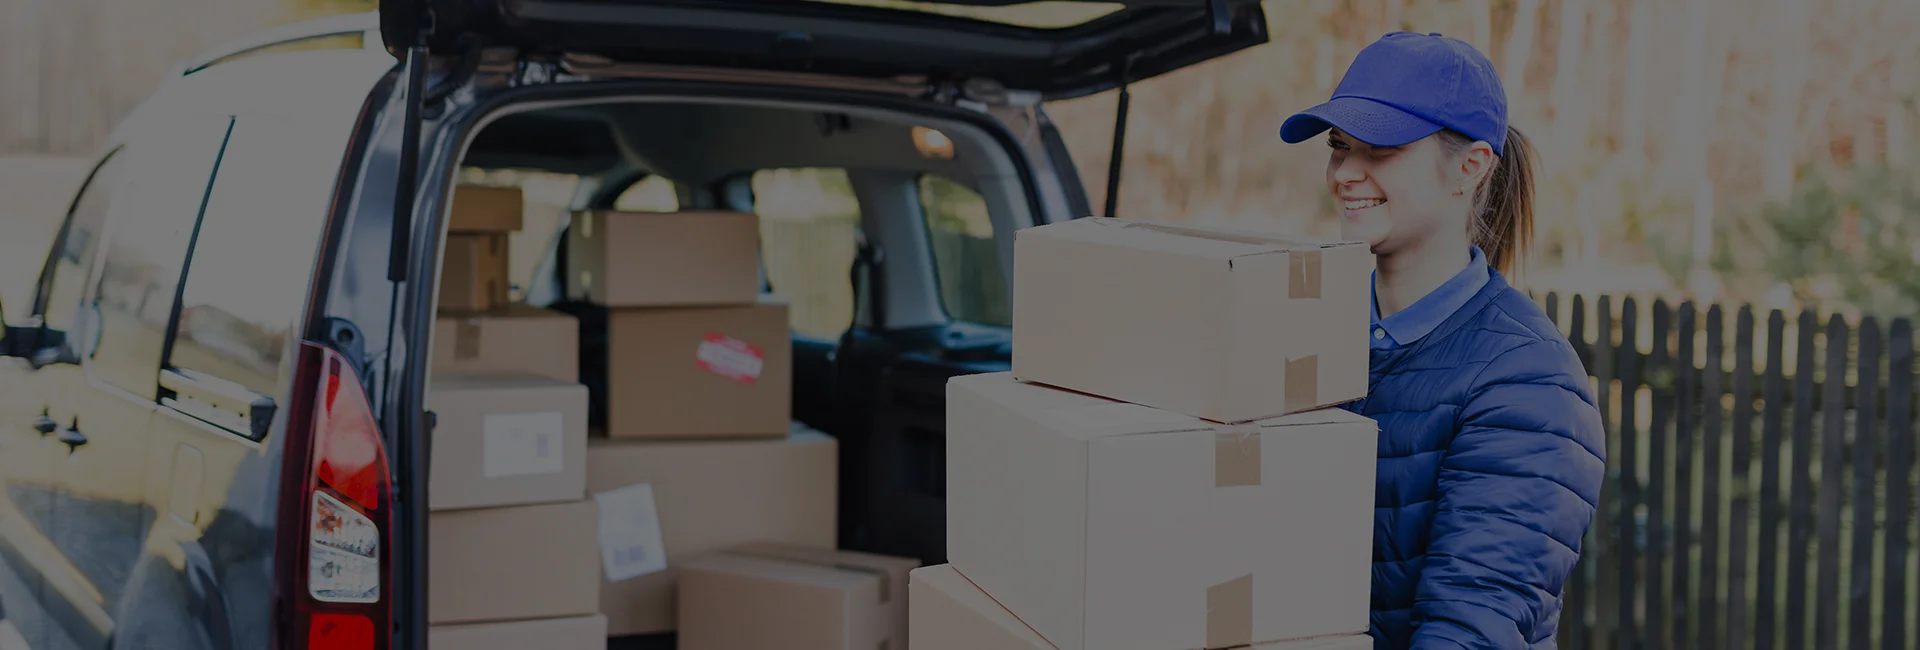 5 Things to Consider When Choosing a Car Relocation Service - Earthrelo